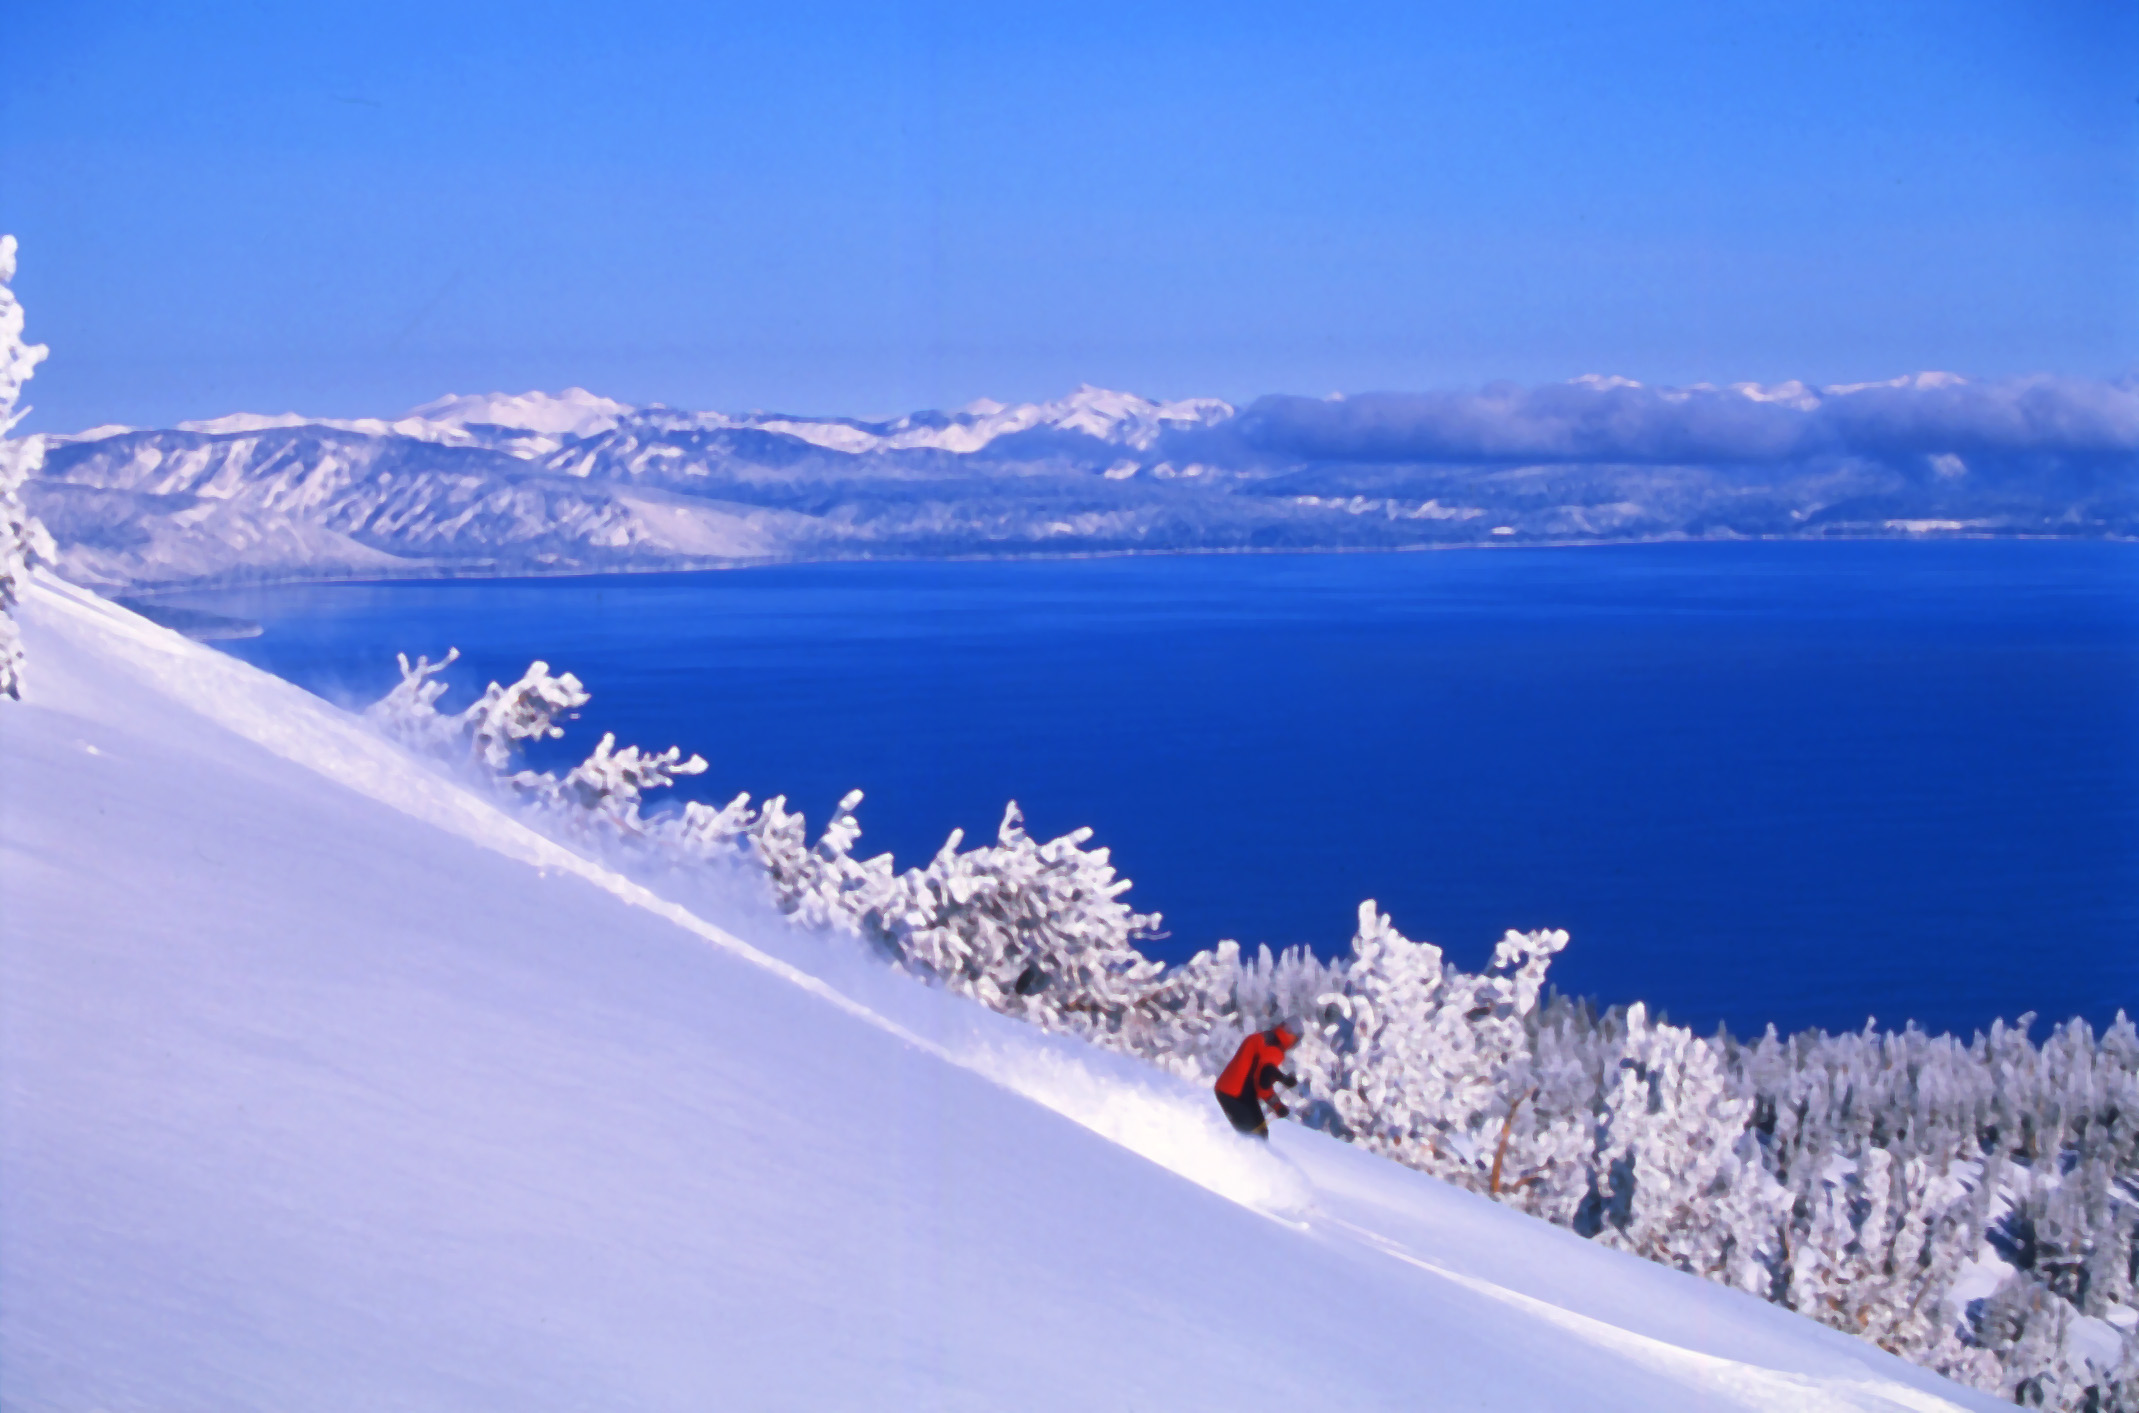 Skiing Heavenly with Lake Tahoe in the backdrop